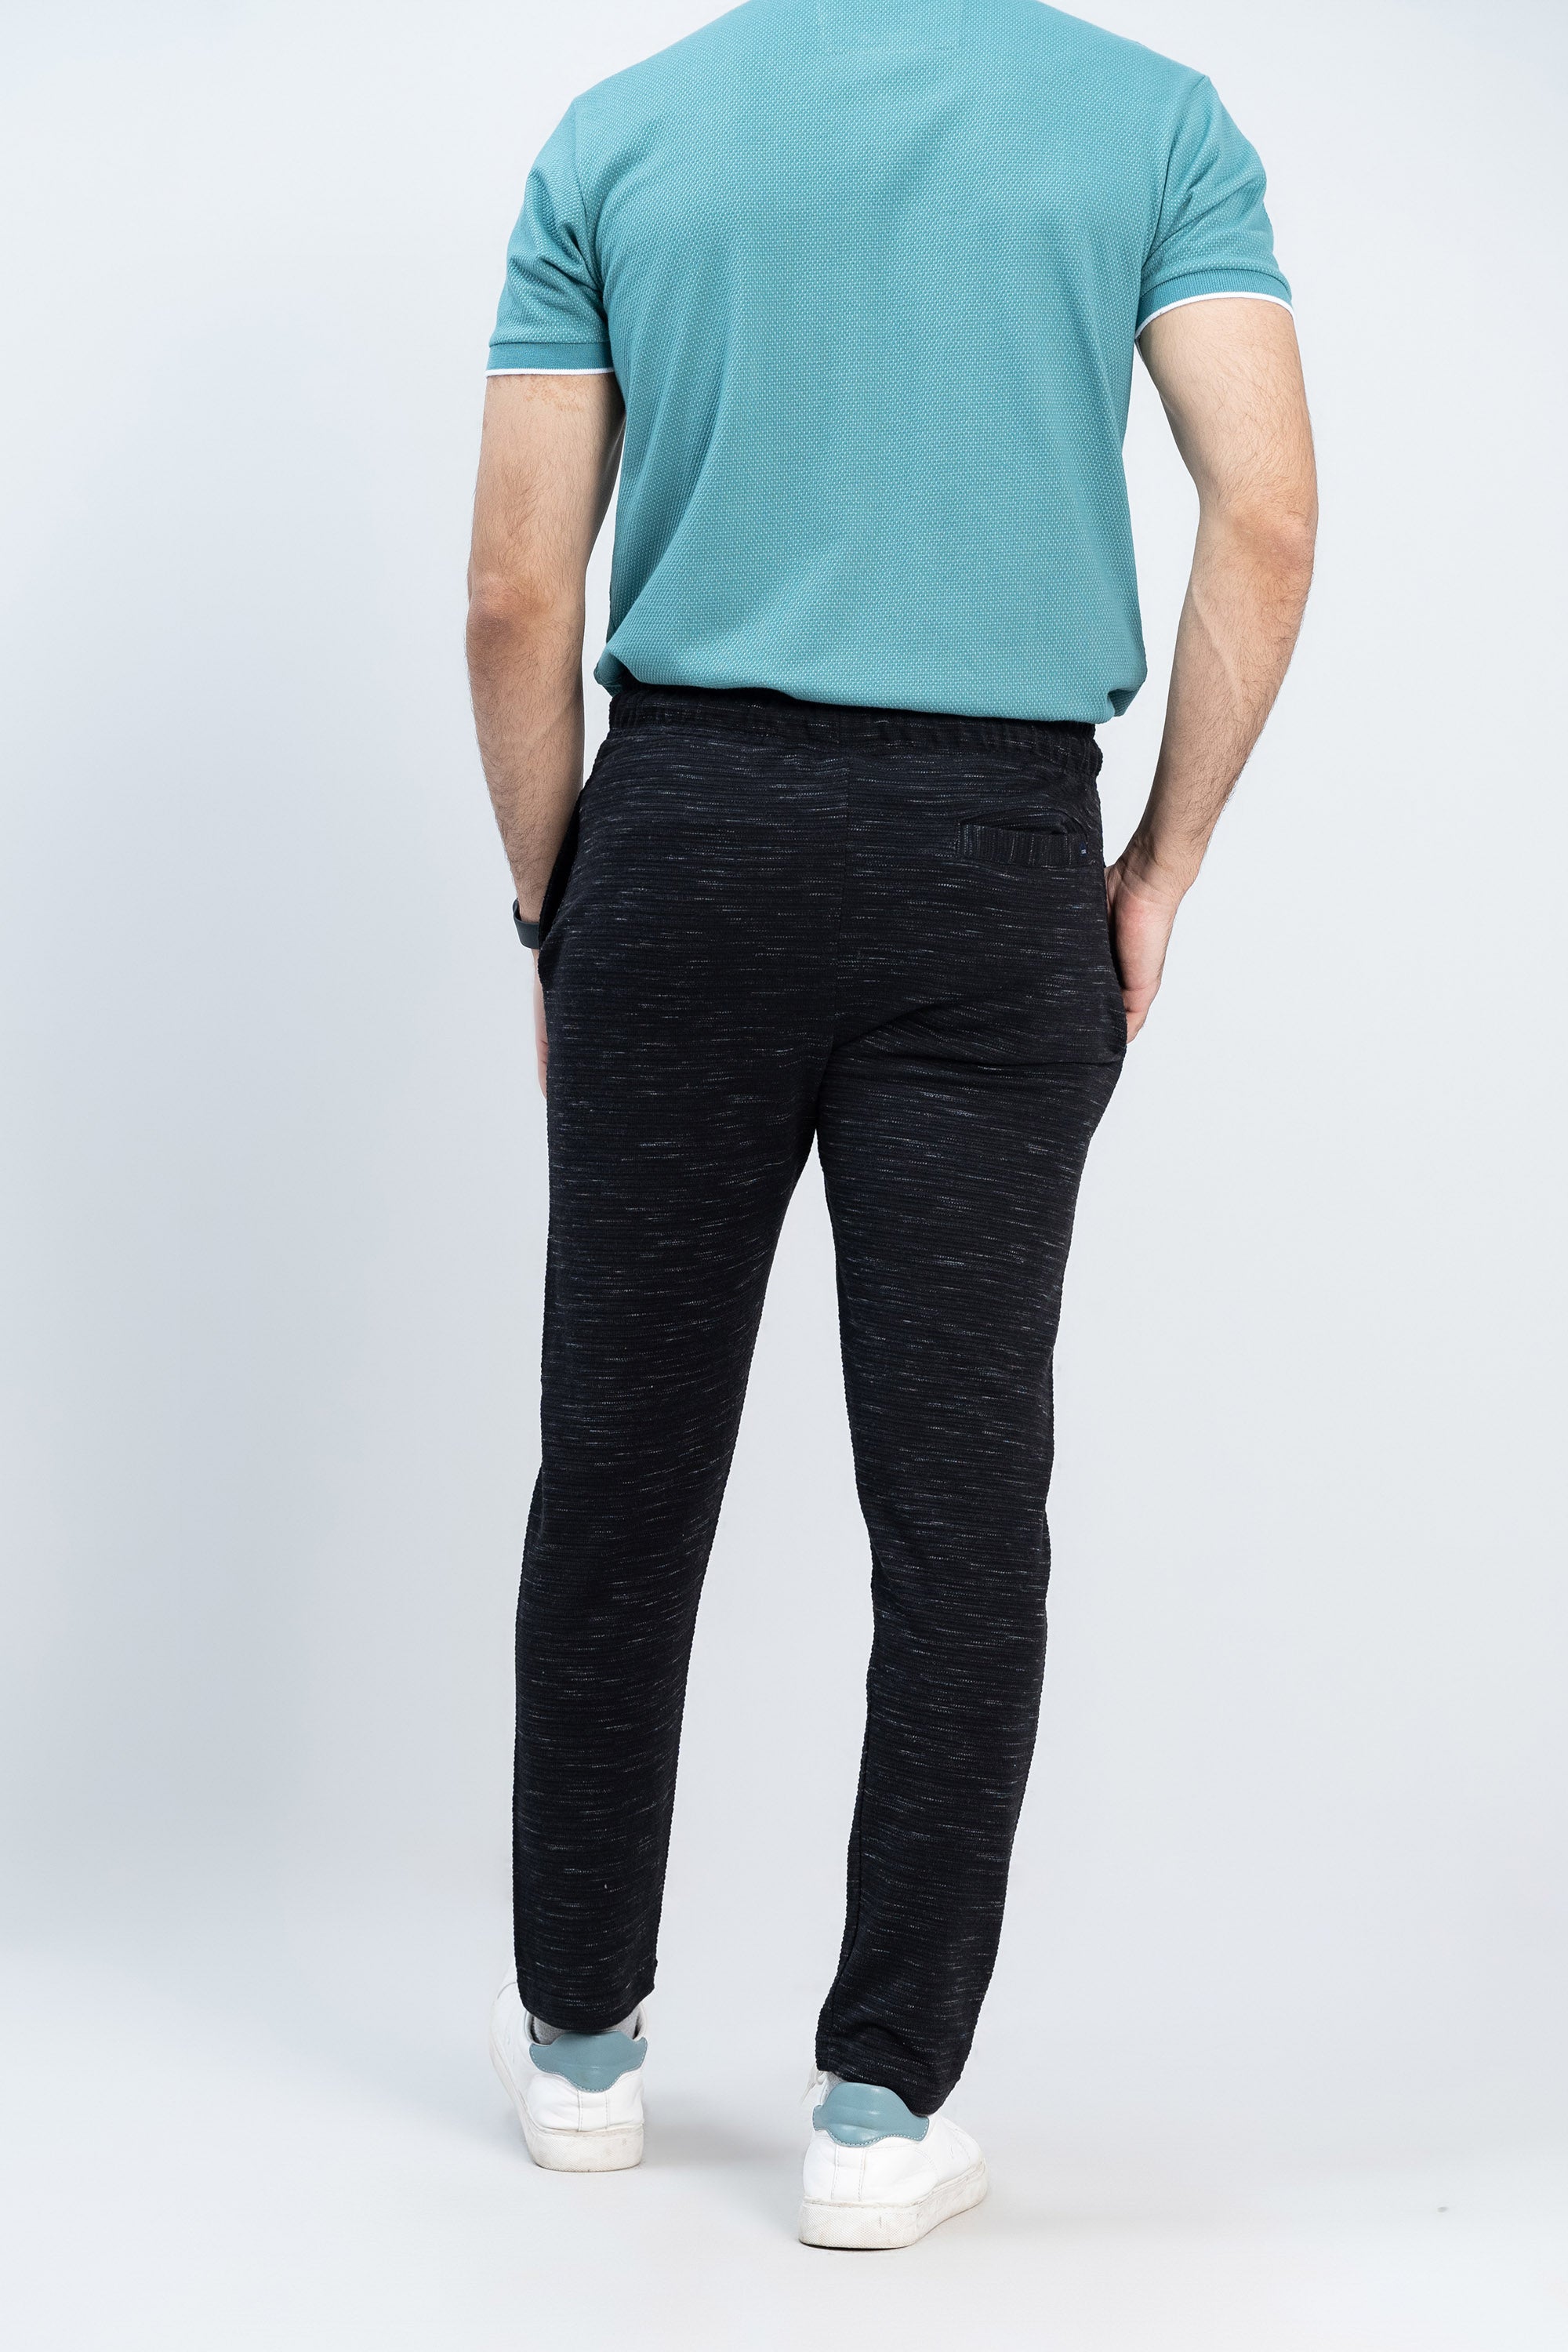 Comfy Black Knitted Trousers